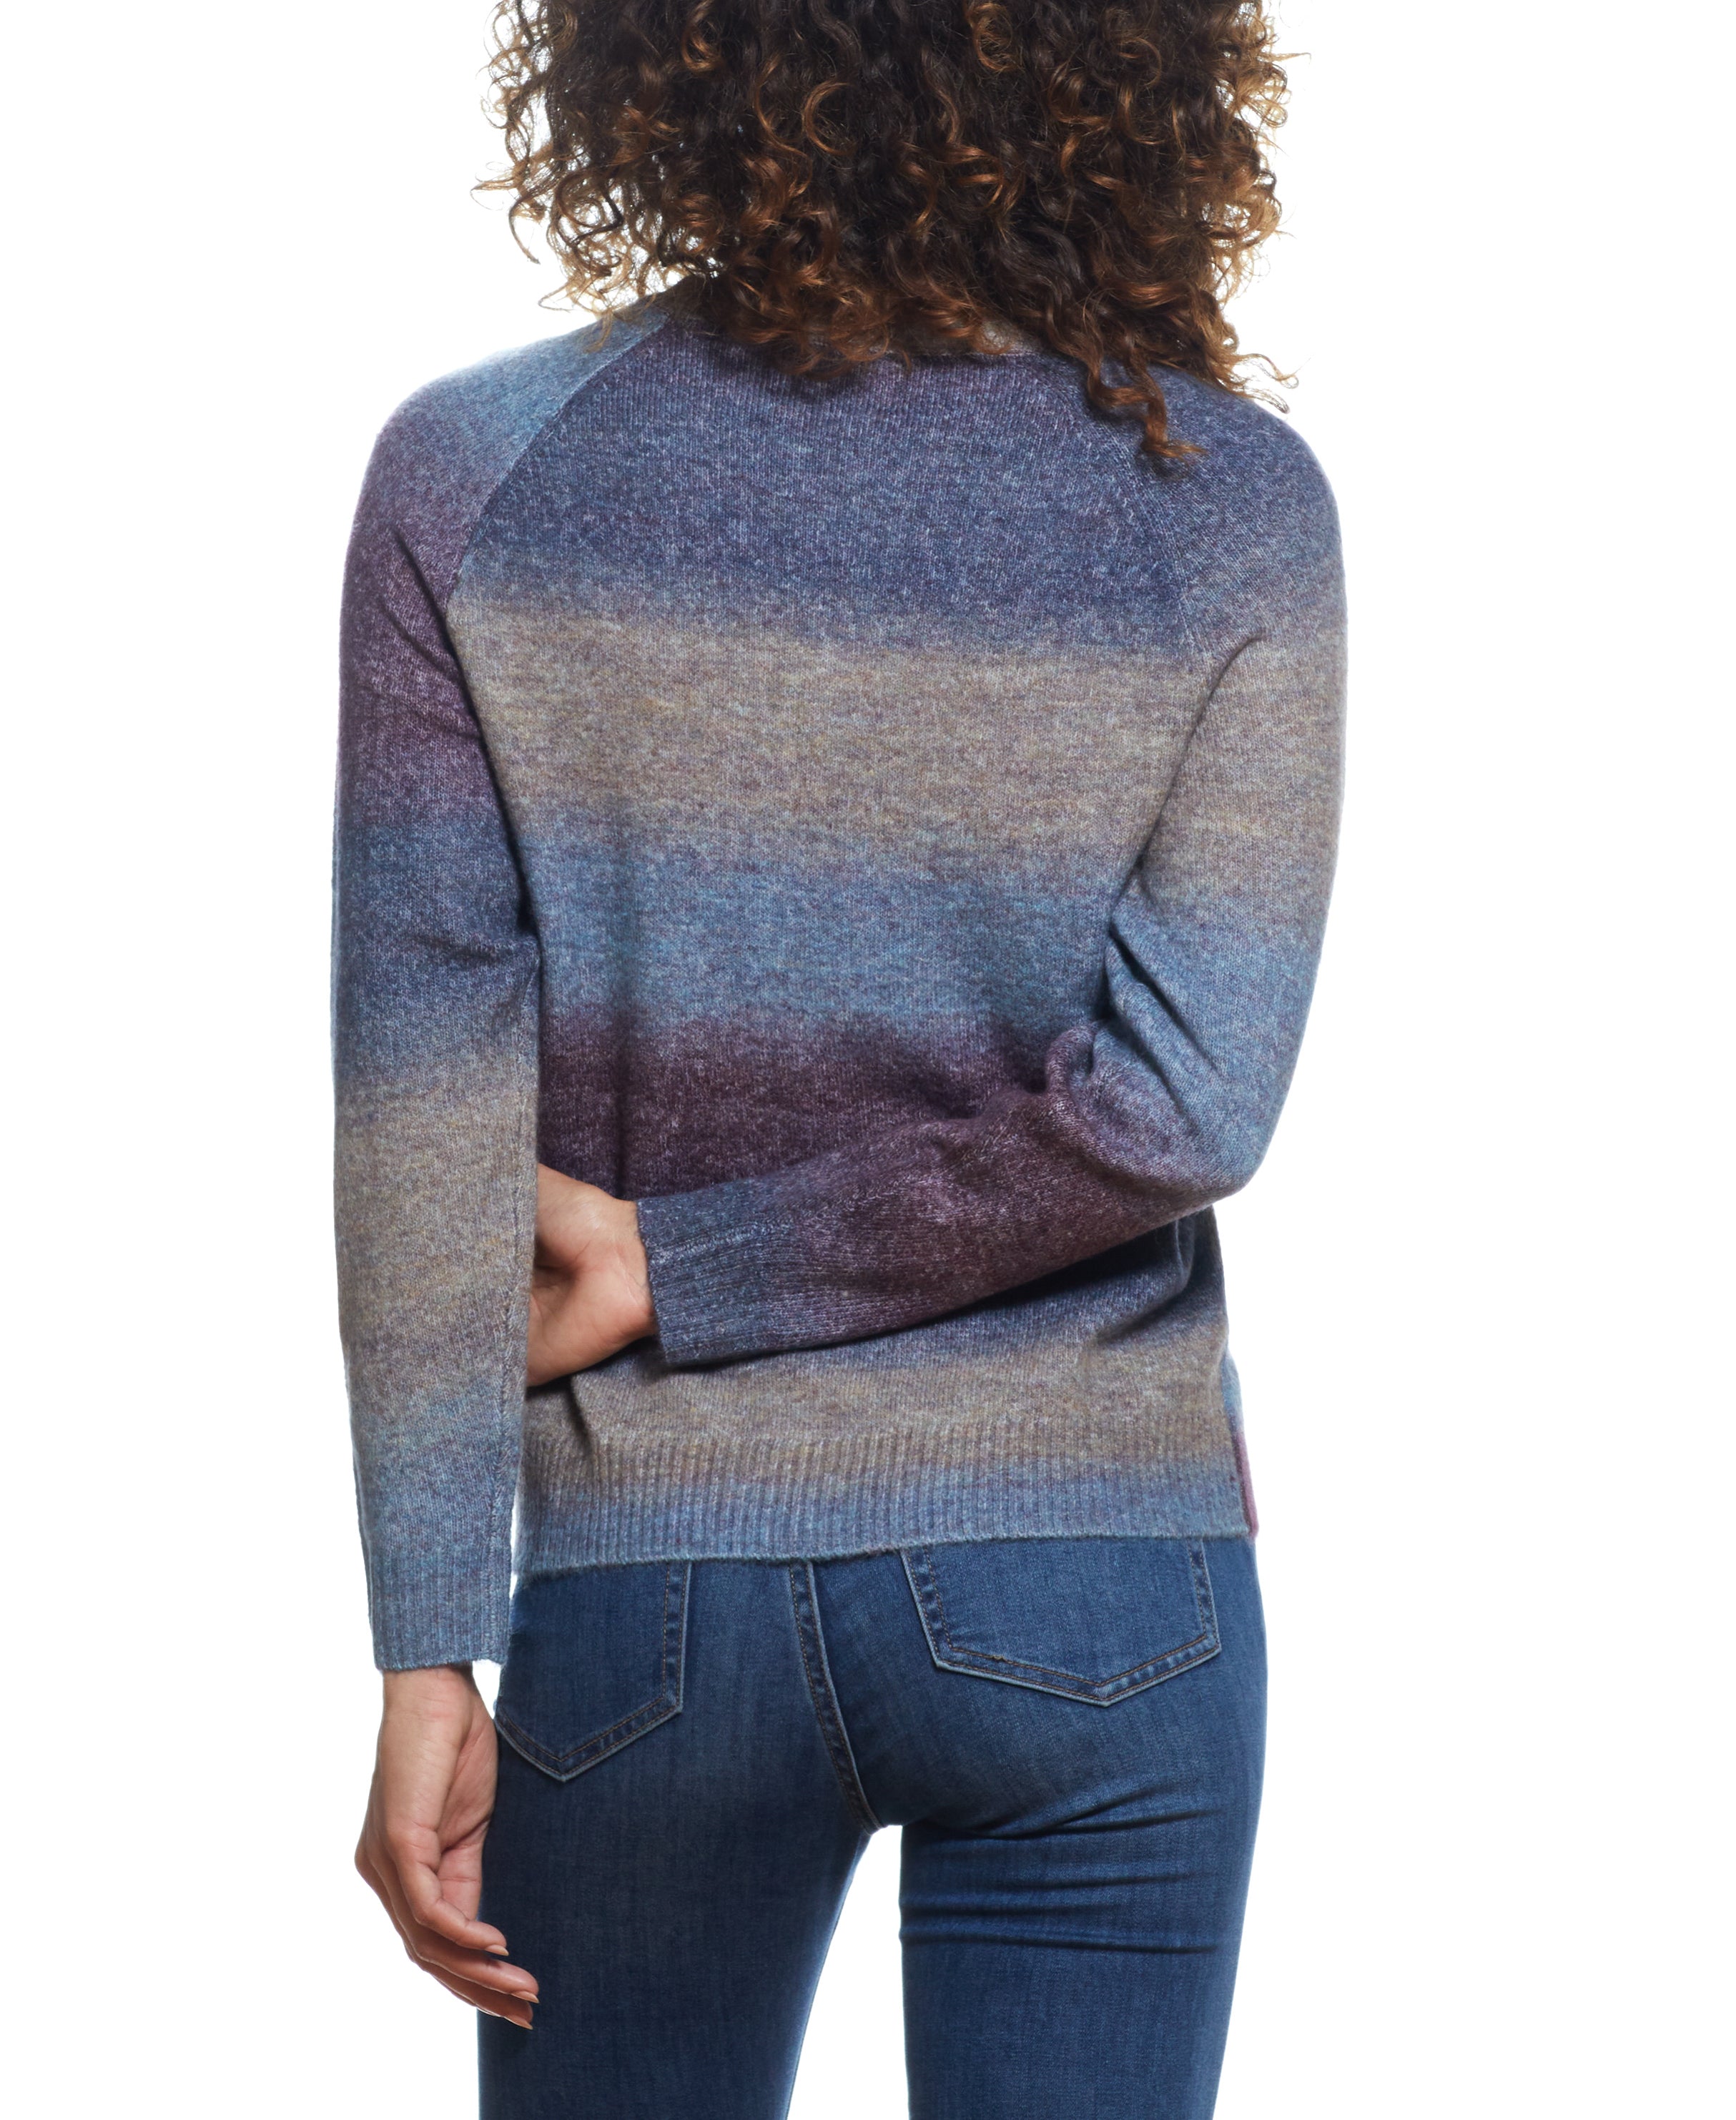 WOMENS SPACE DYE SWEATER IN COLOR DUST